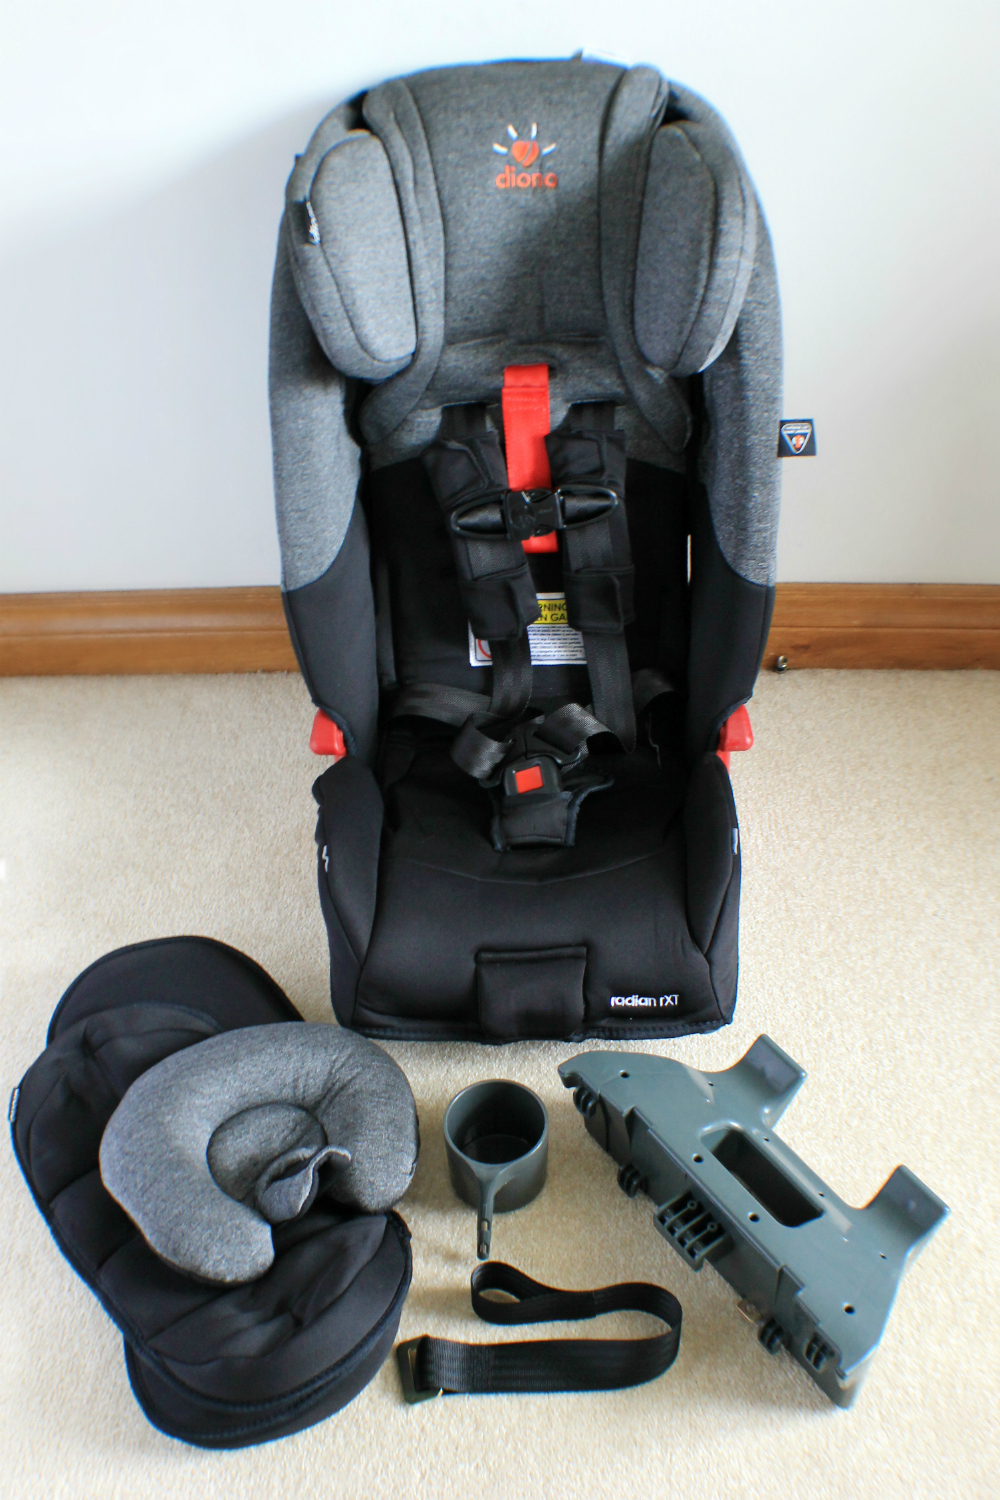 7 Car Seat Safety Tips And The Diono Radian rXT